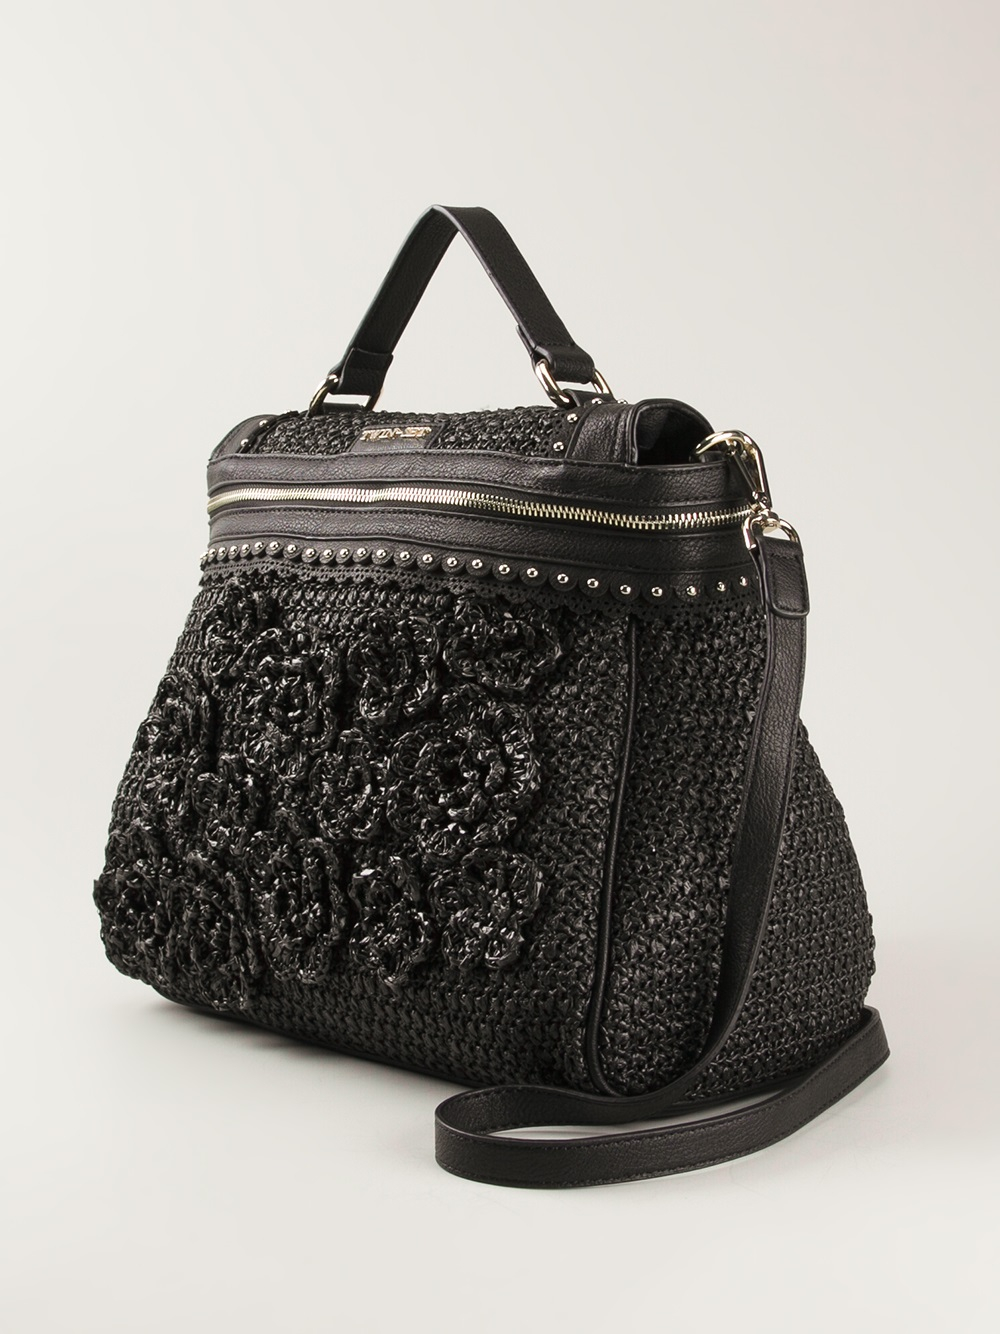 Lyst - Twin Set Floral Crochet Tote Bag in Black